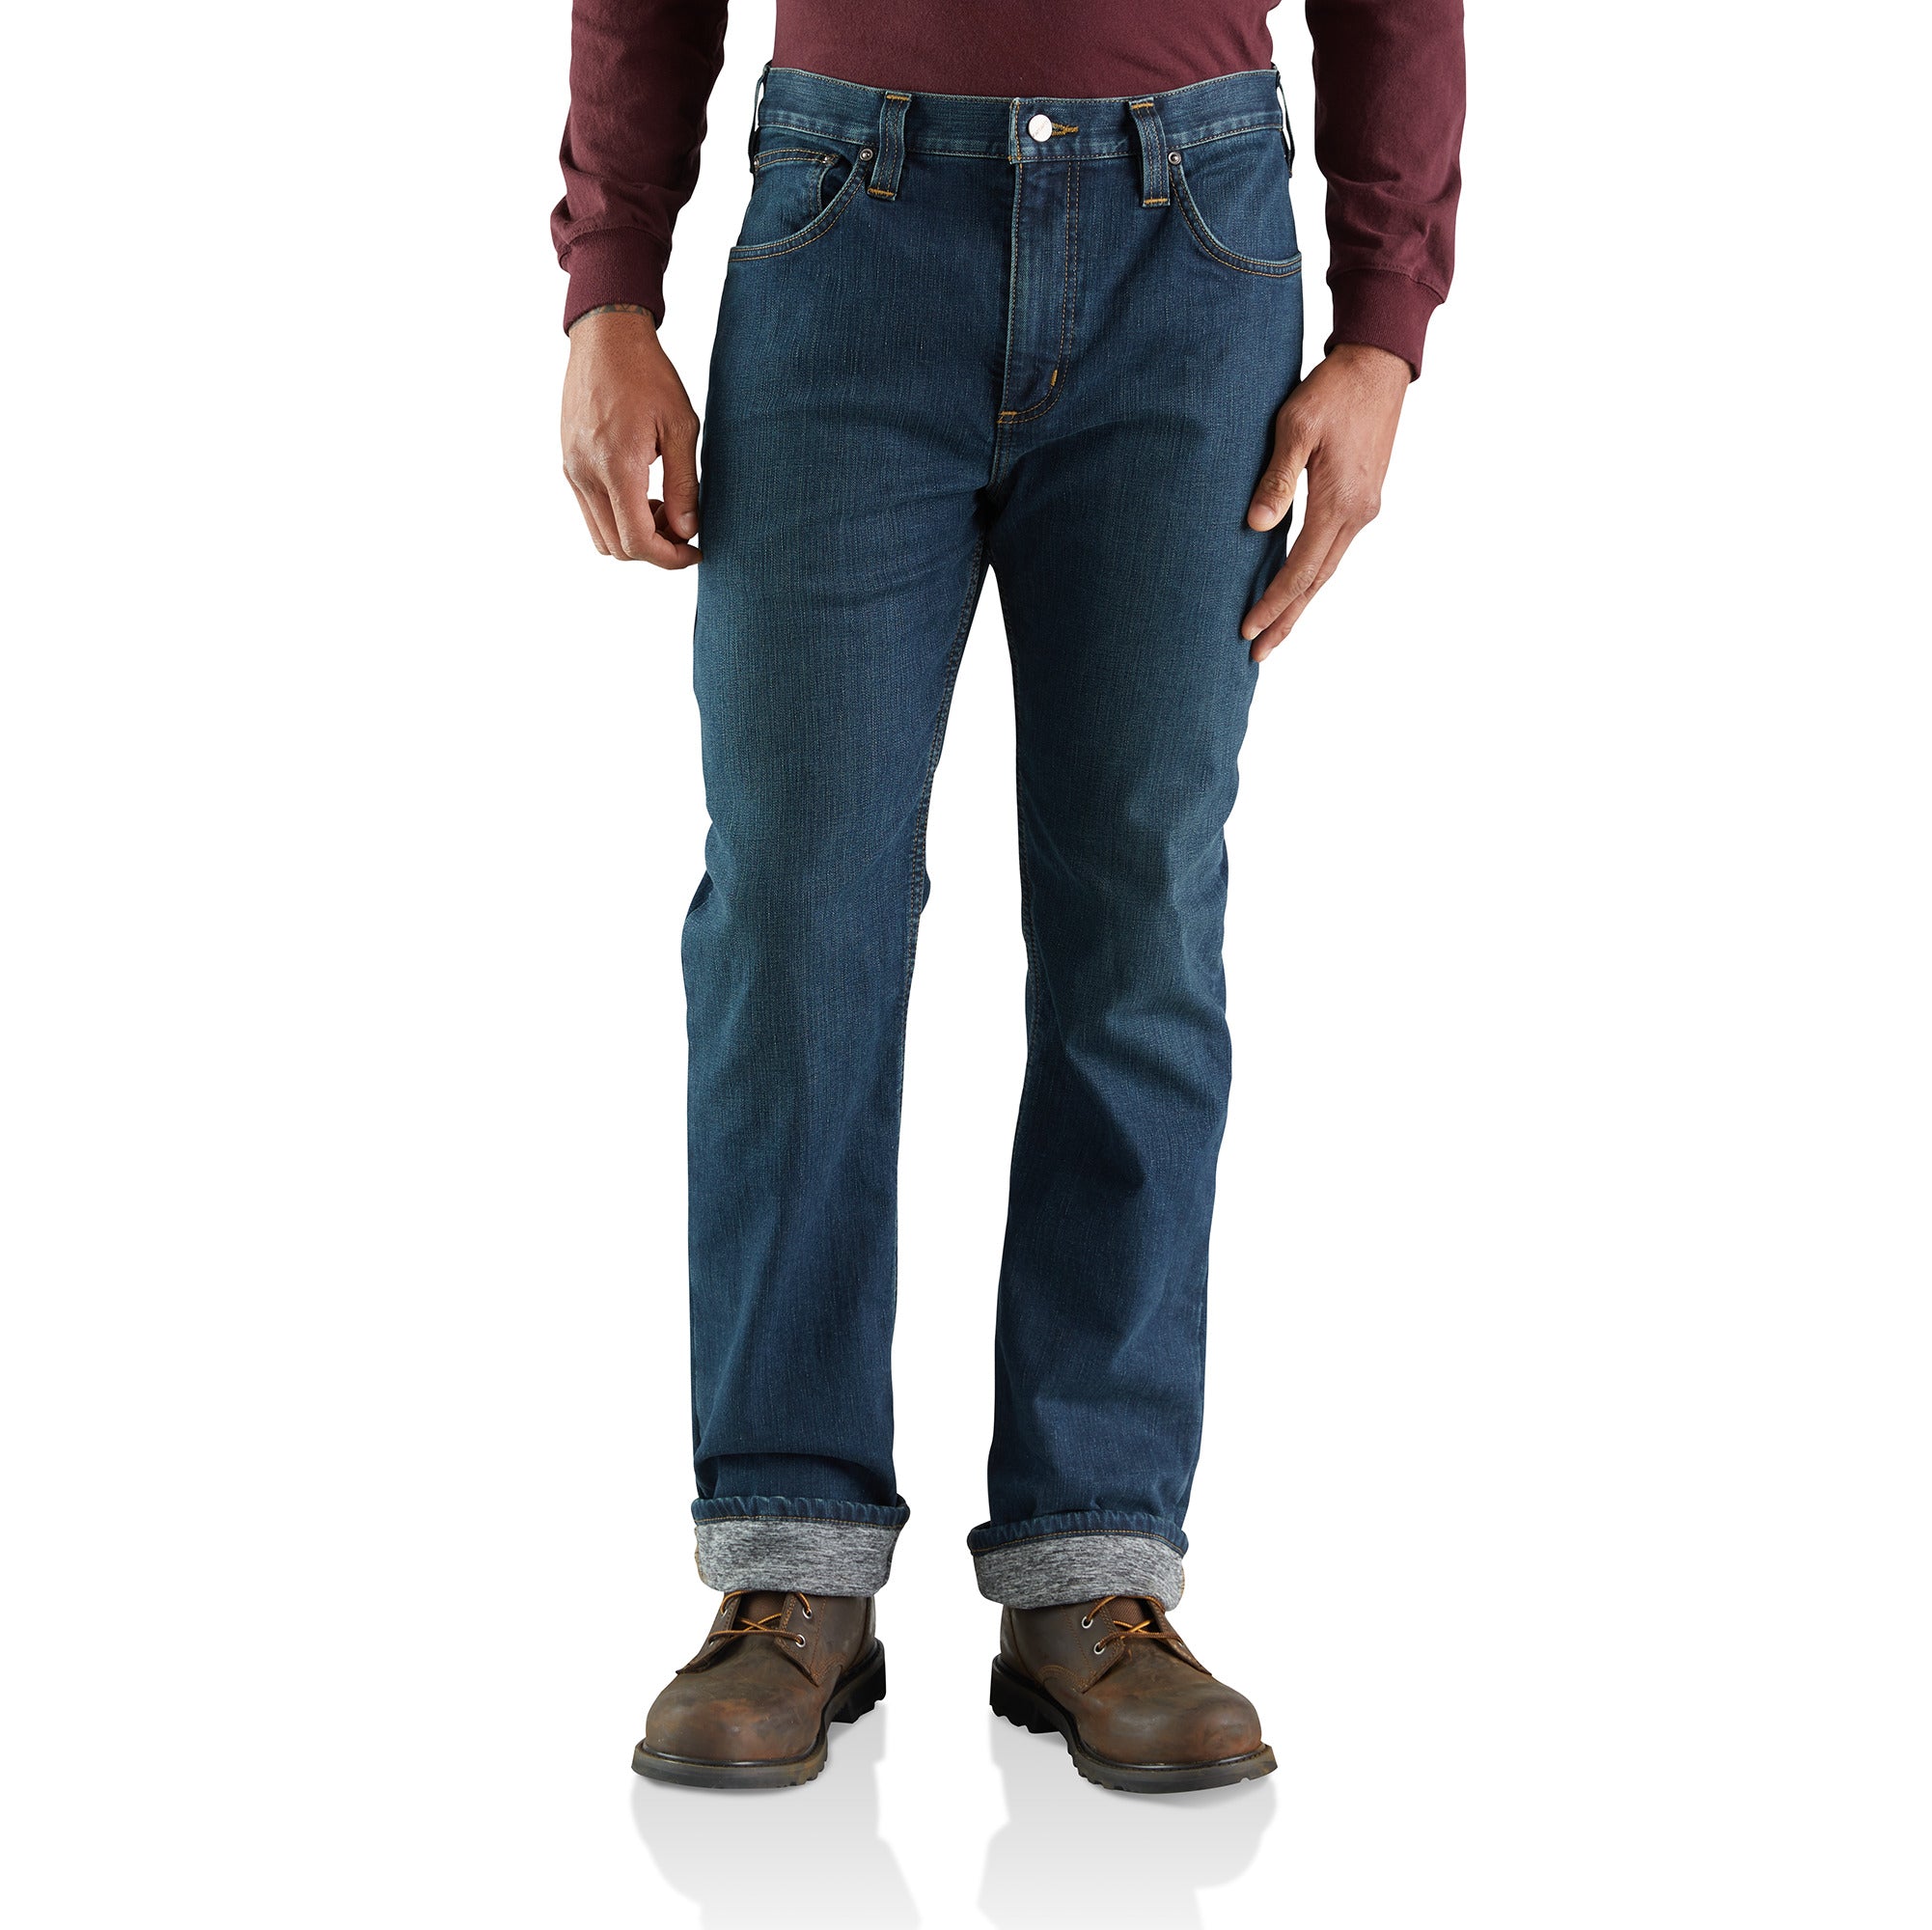 'Carhartt' Men's Rugged Flex Relaxed Knit Lined Straight Jean - Superior